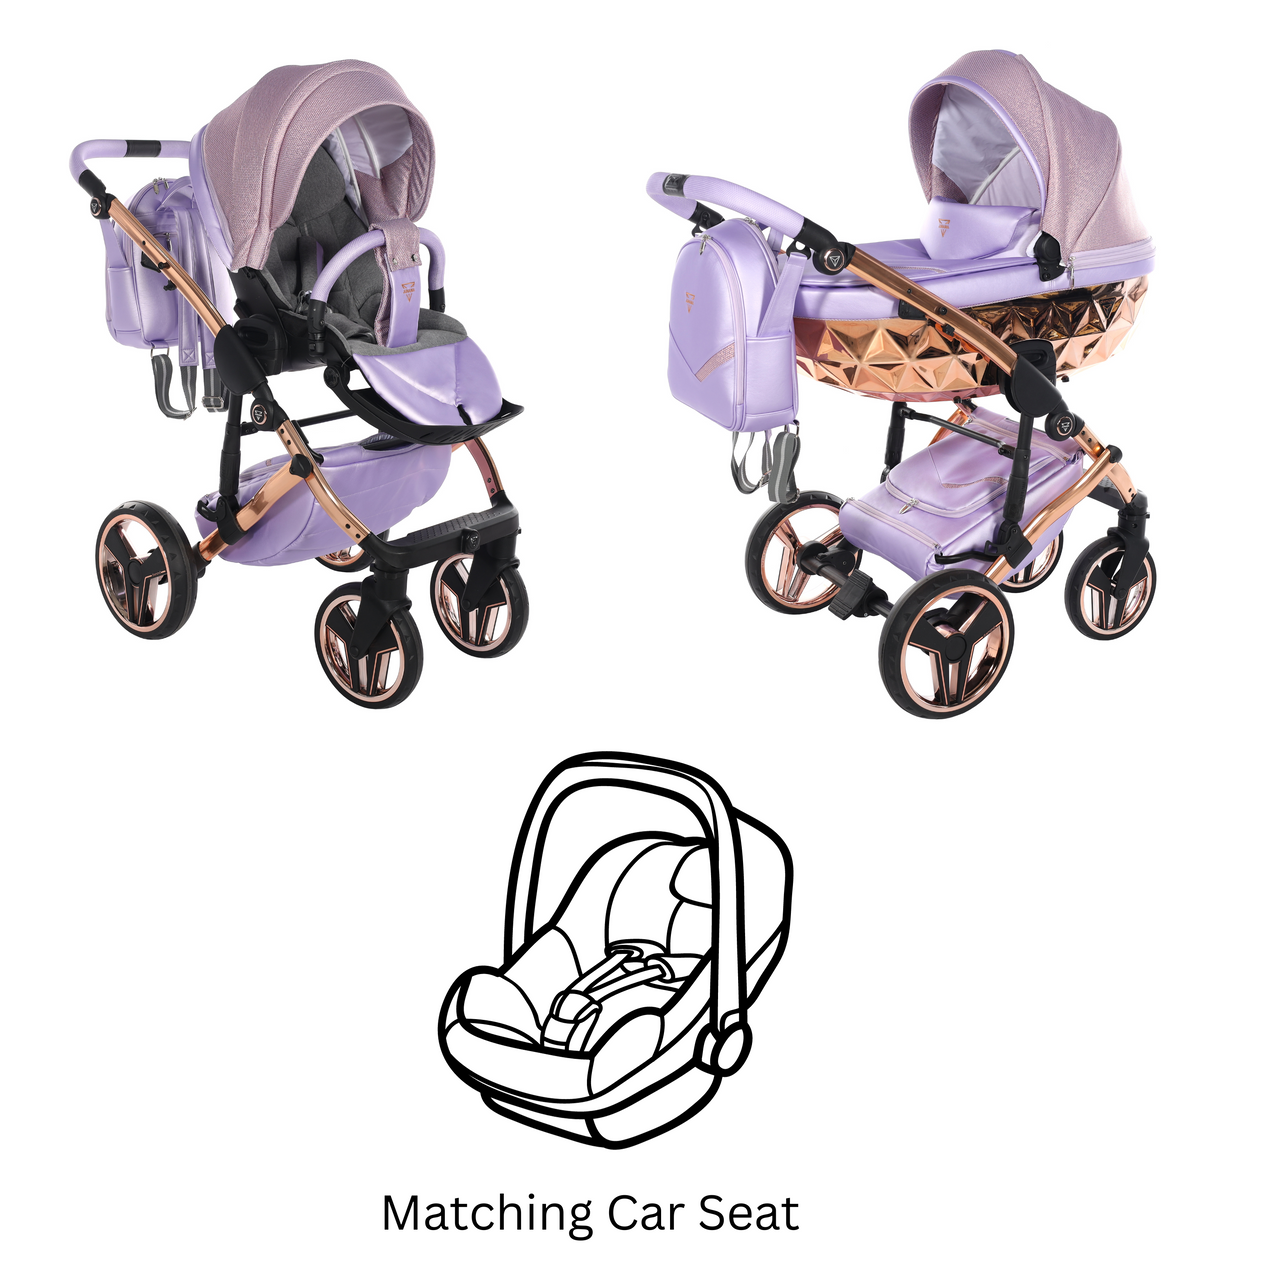 Junama Dolce 3 In 1 Travel System - Lilac / Rose Gold - For Your Little One